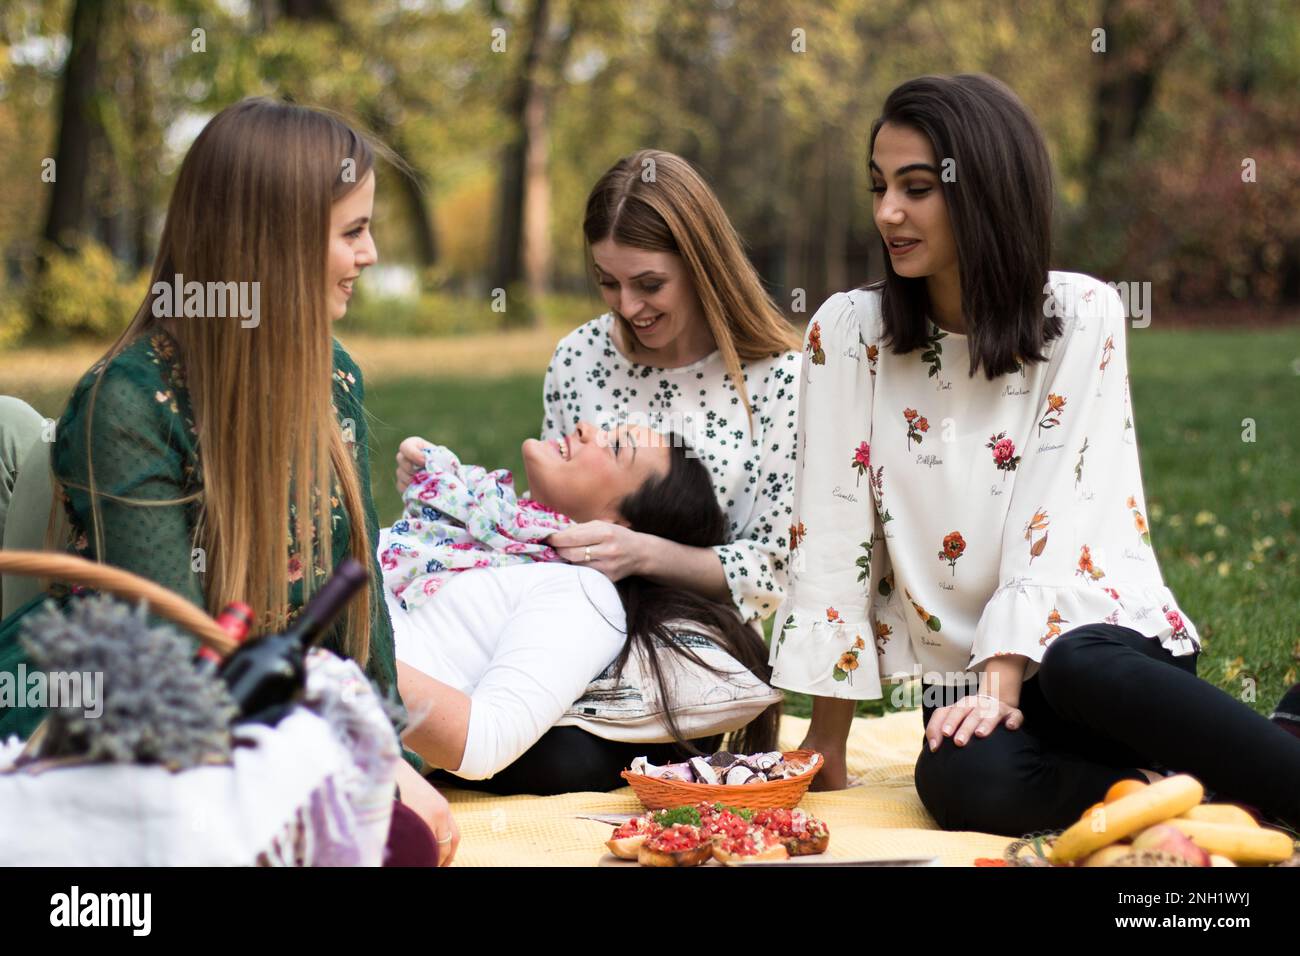 Group of four women on a fun fall picnic in the park, having a good time. Stock Photo